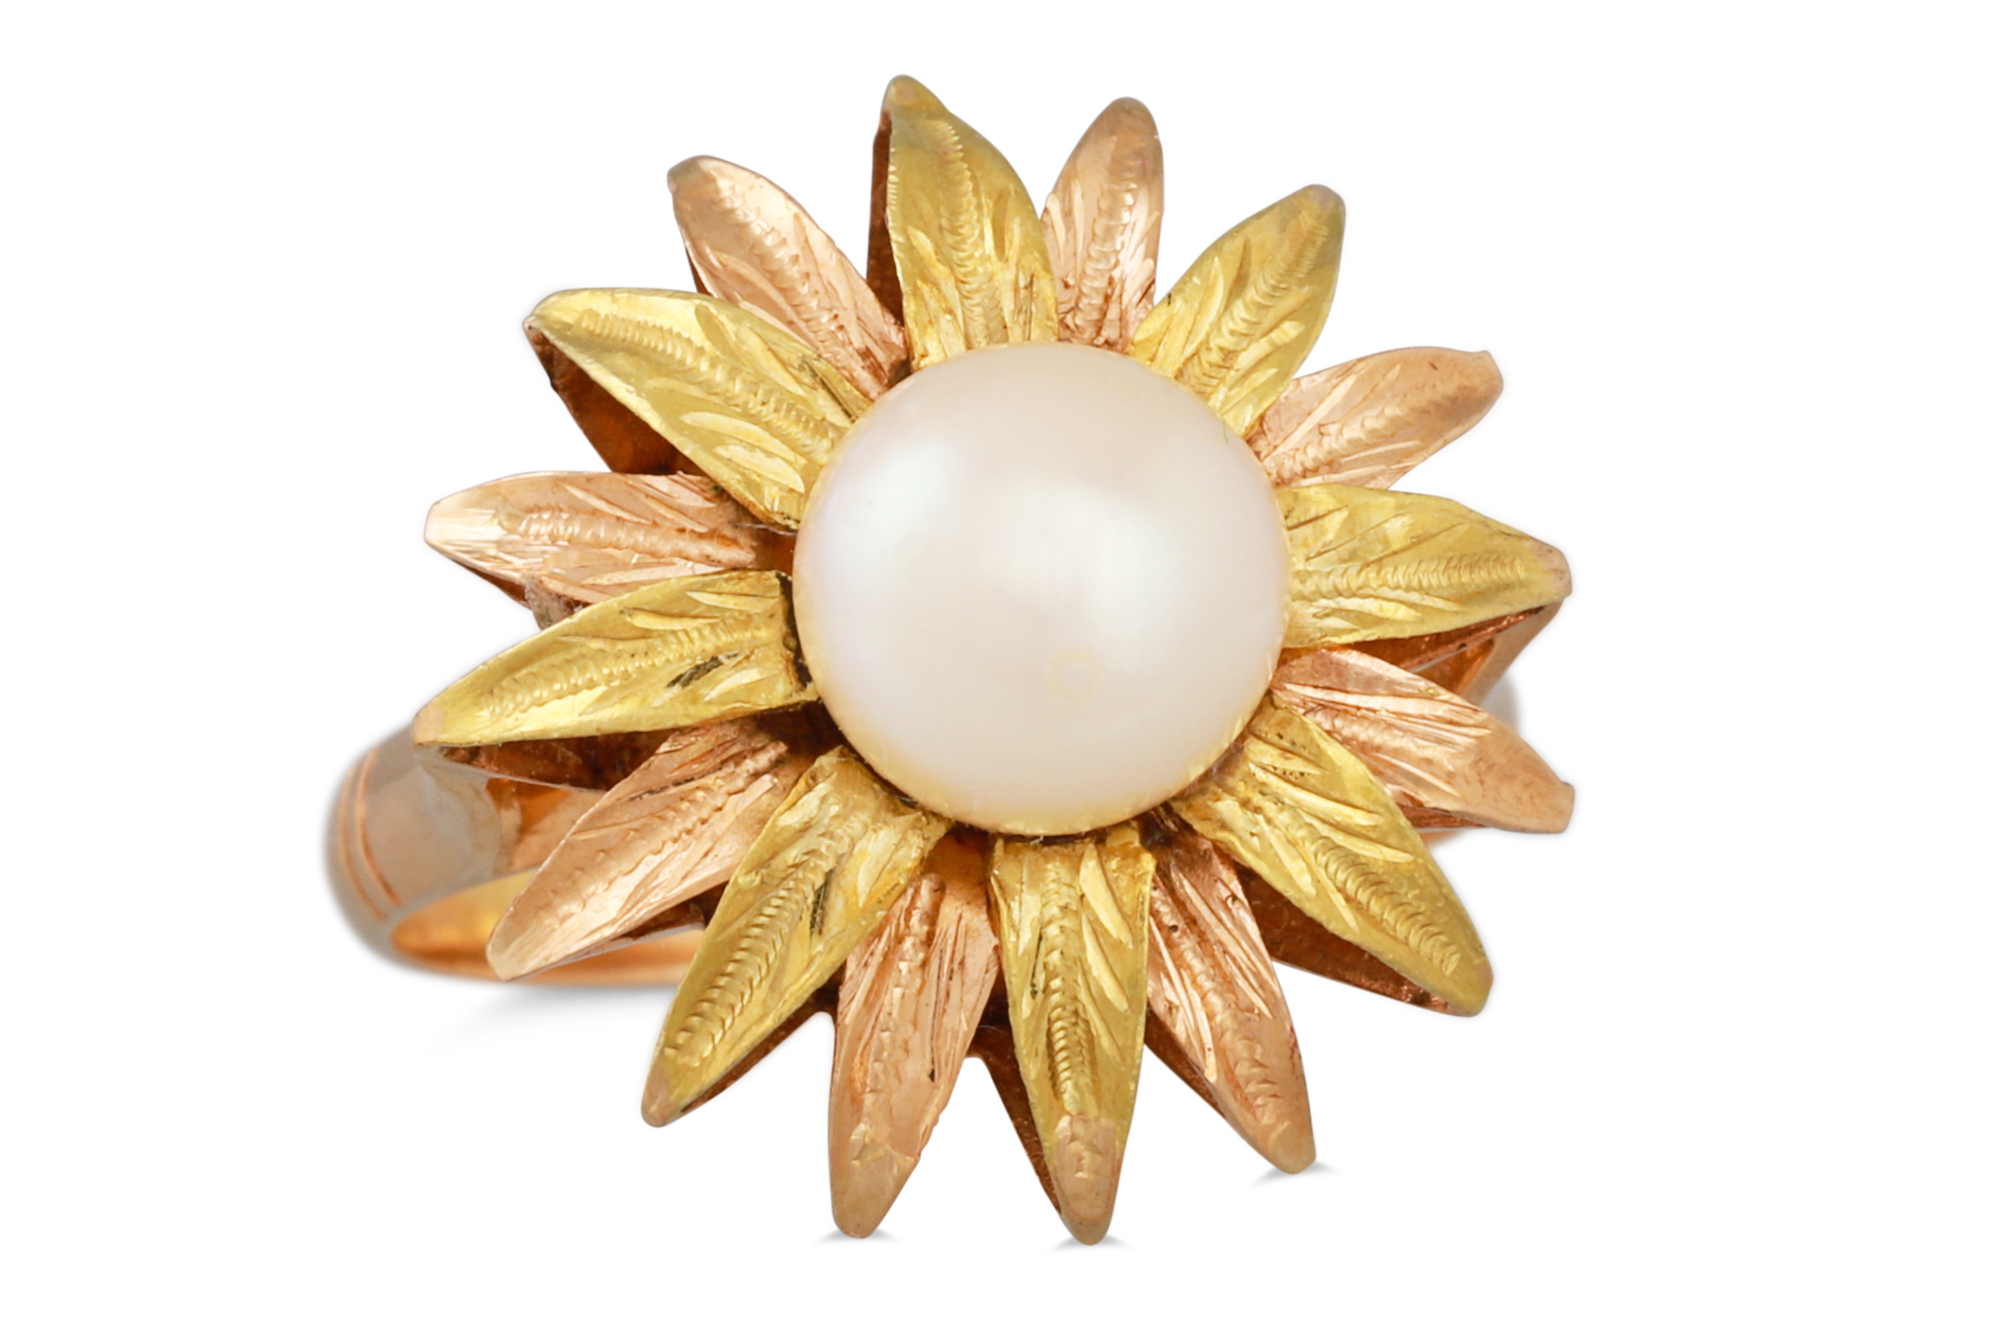 A MABE PEARL RING, mounted in yellow gold, together with a pearl set ring. Sizes: L and K-L - Image 2 of 3